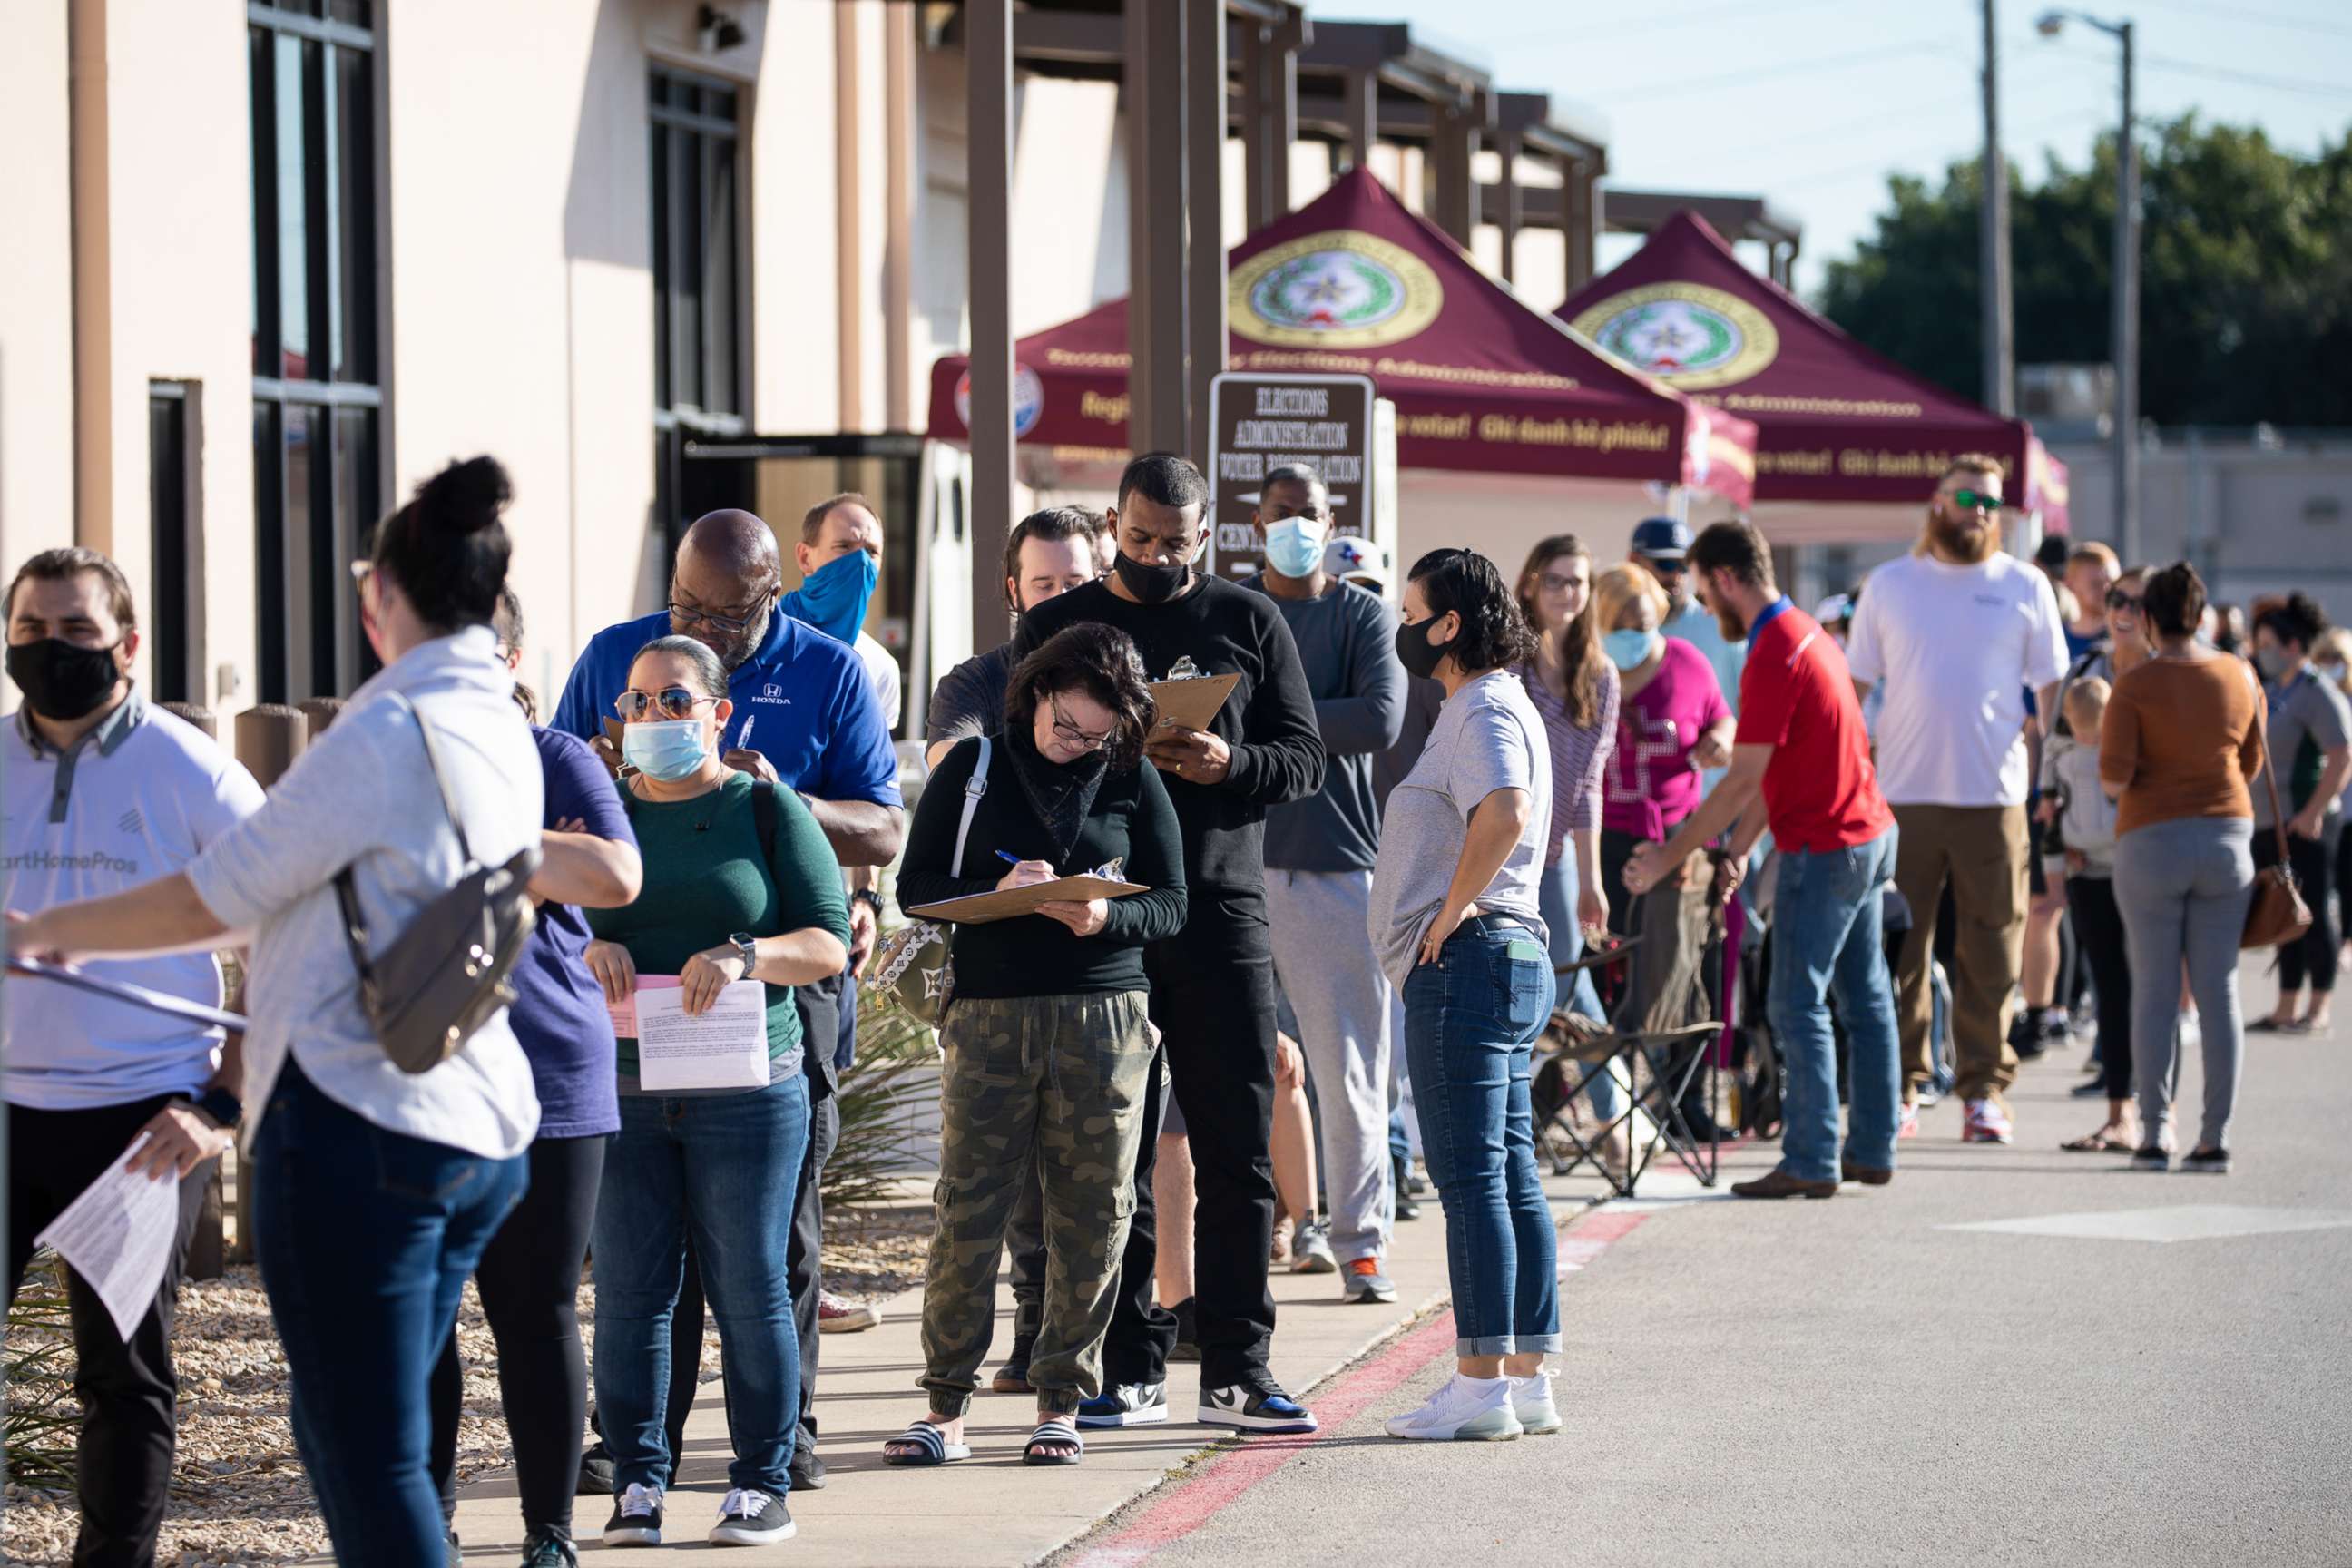 PHOTO: In this Oct. 29, 2020, file photo, people wait in line to vote at Tarrant County Elections Center on the last day of early voting in Fort Worth, Texas.